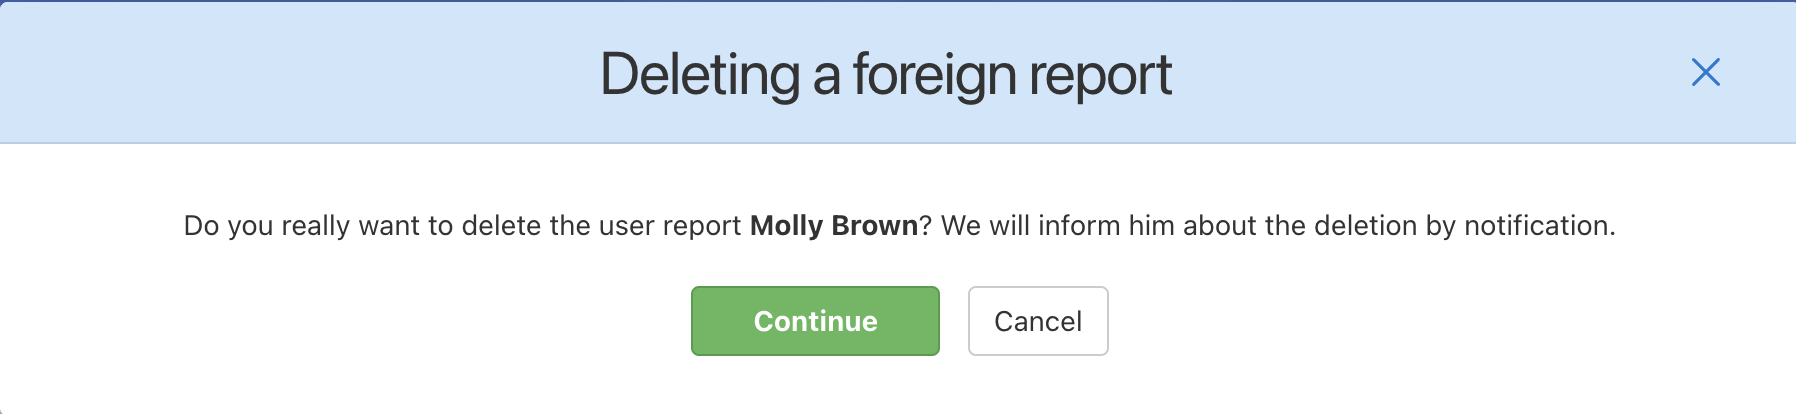 Confirmation request to delete a report of someone else.